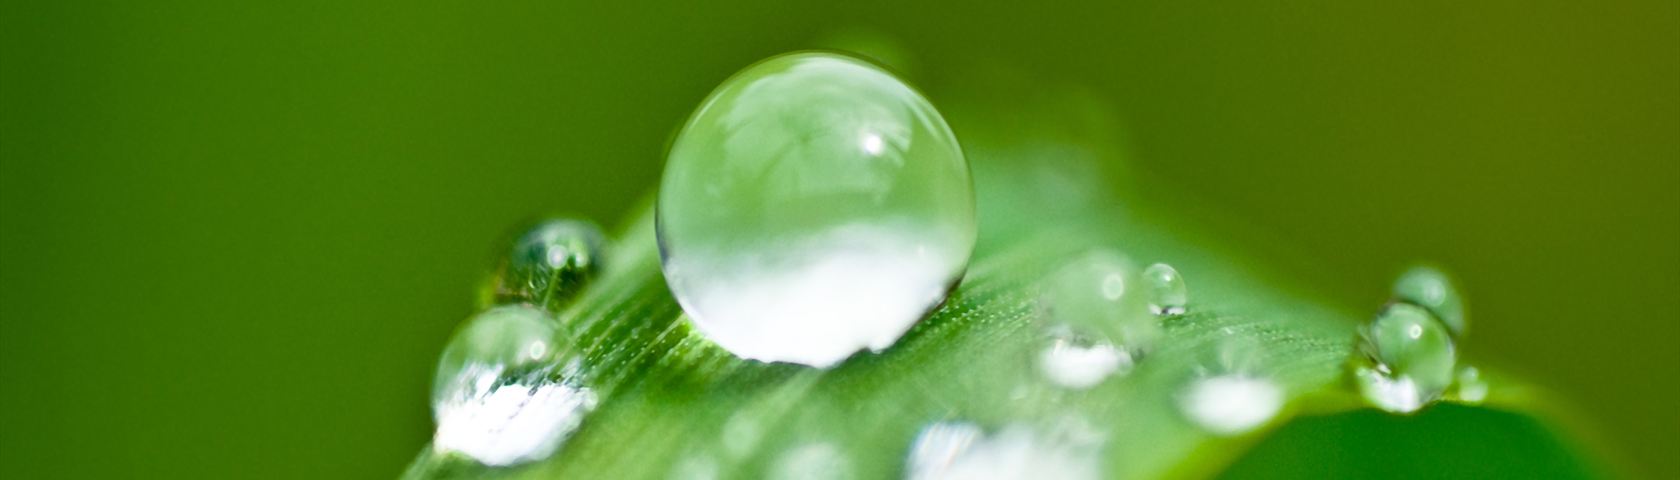 Droplet on Grass